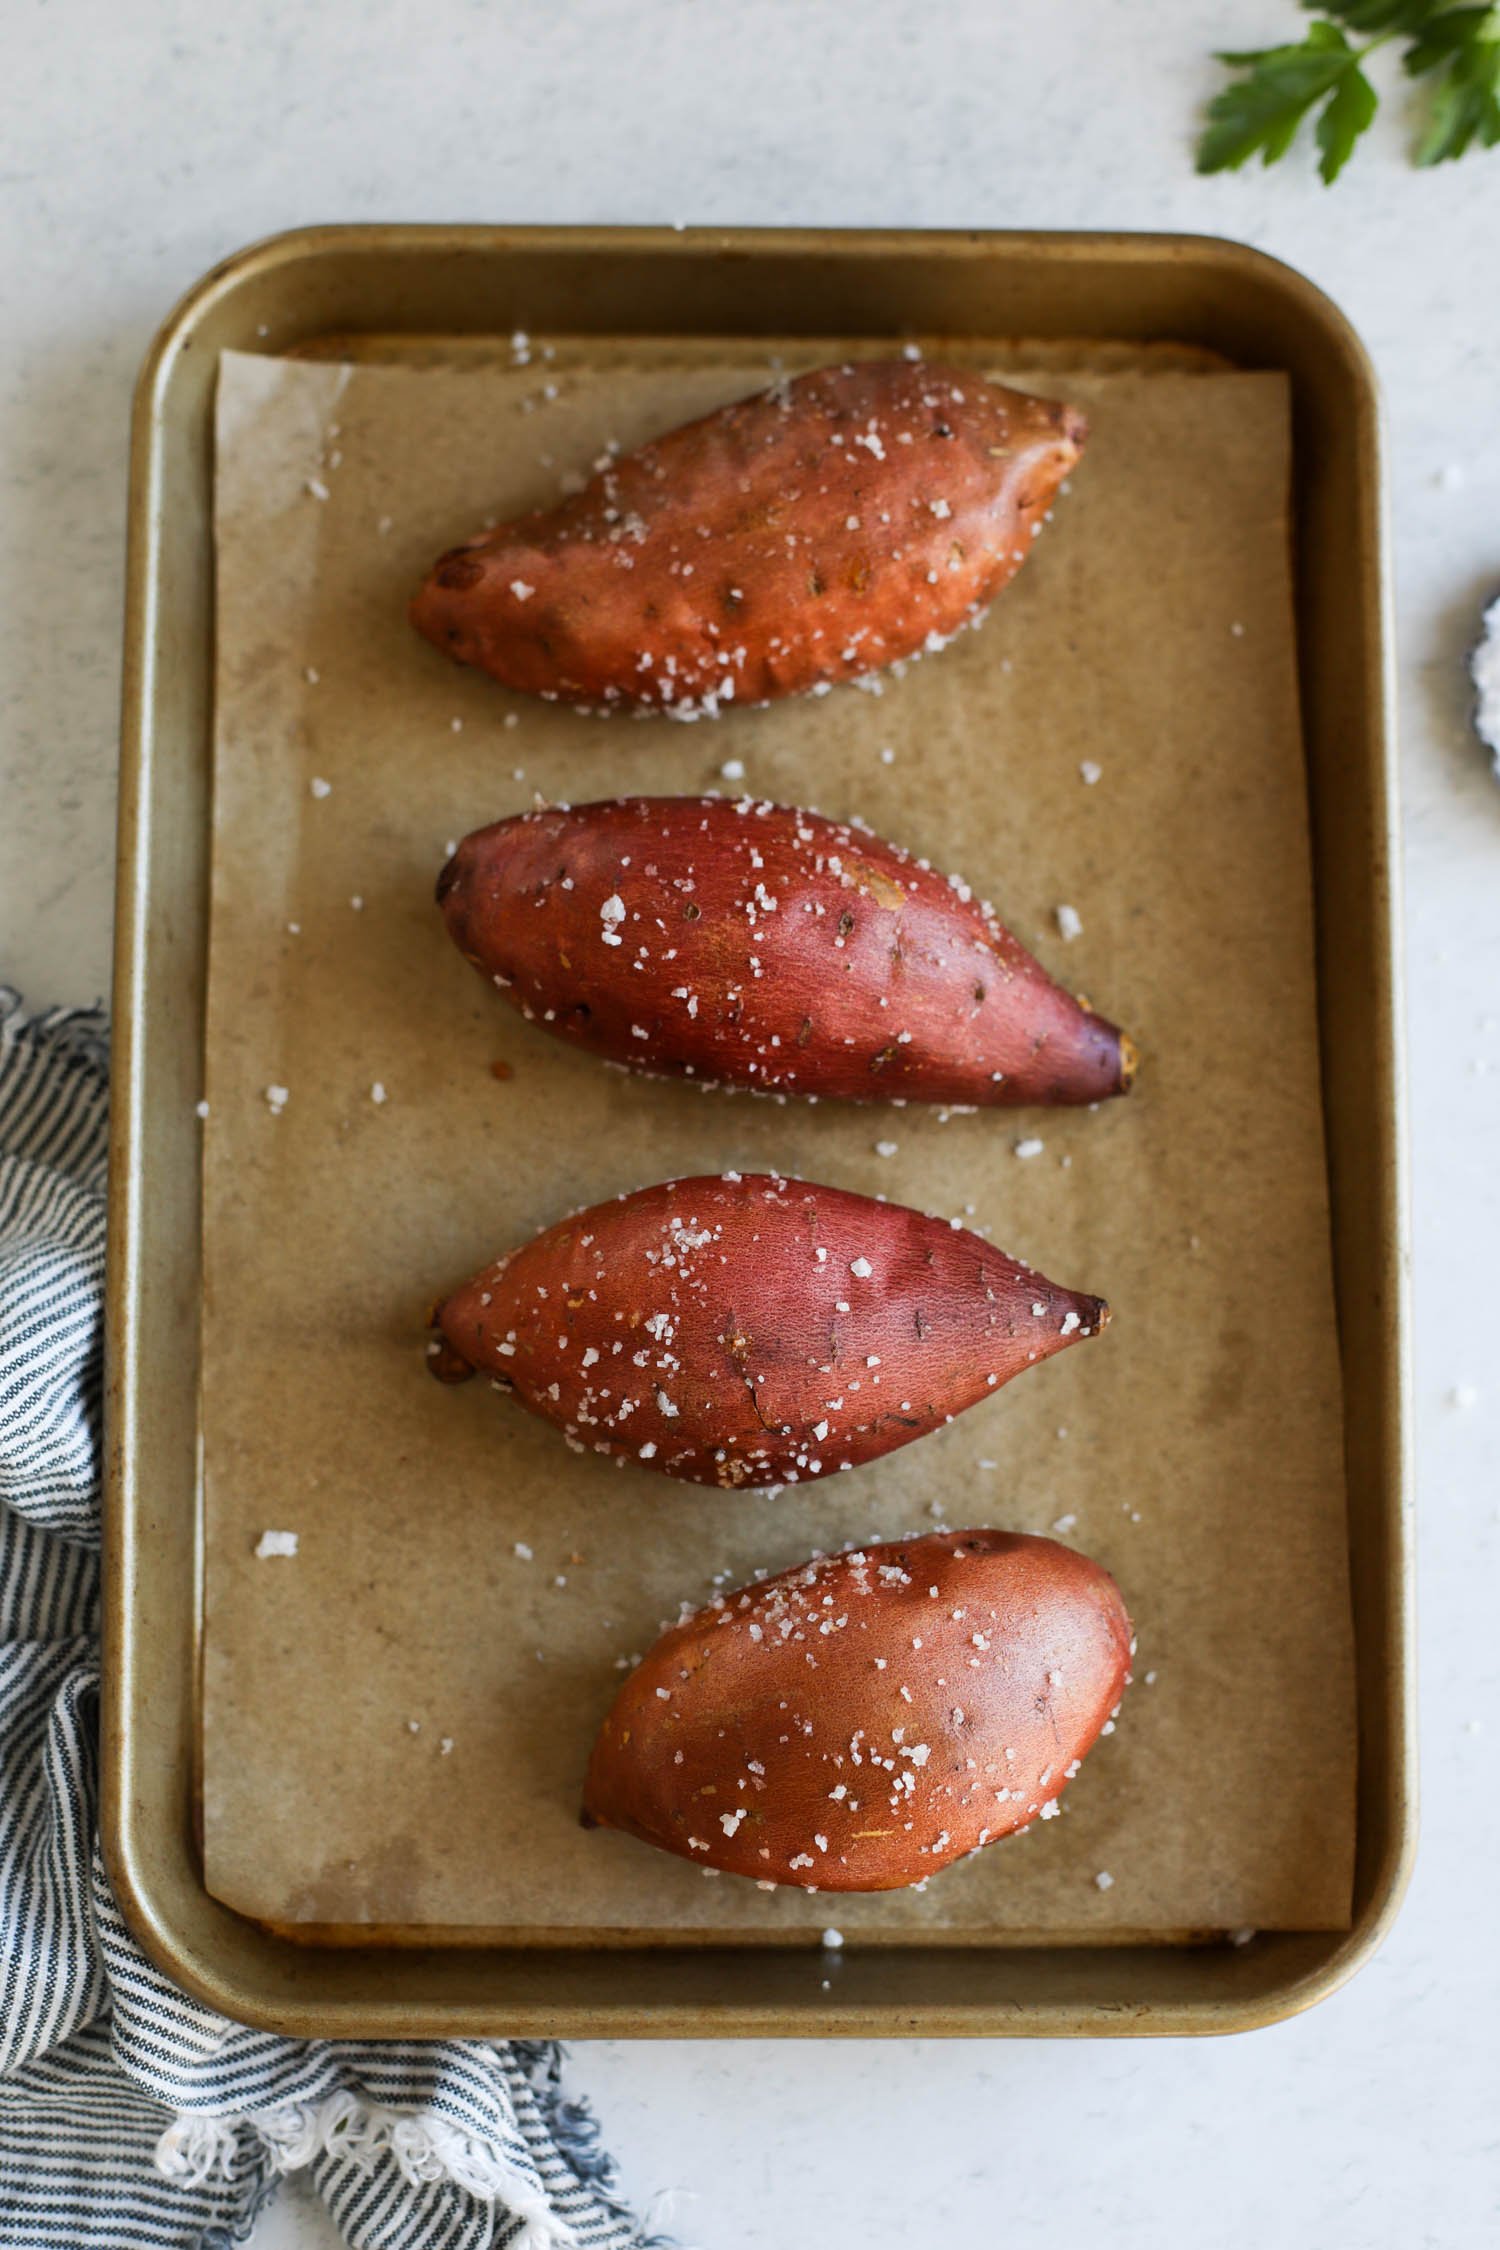 Overhead view of four baked sweet potatoes on a parchment covered baking sheet sprinkled with coarse sea salt.